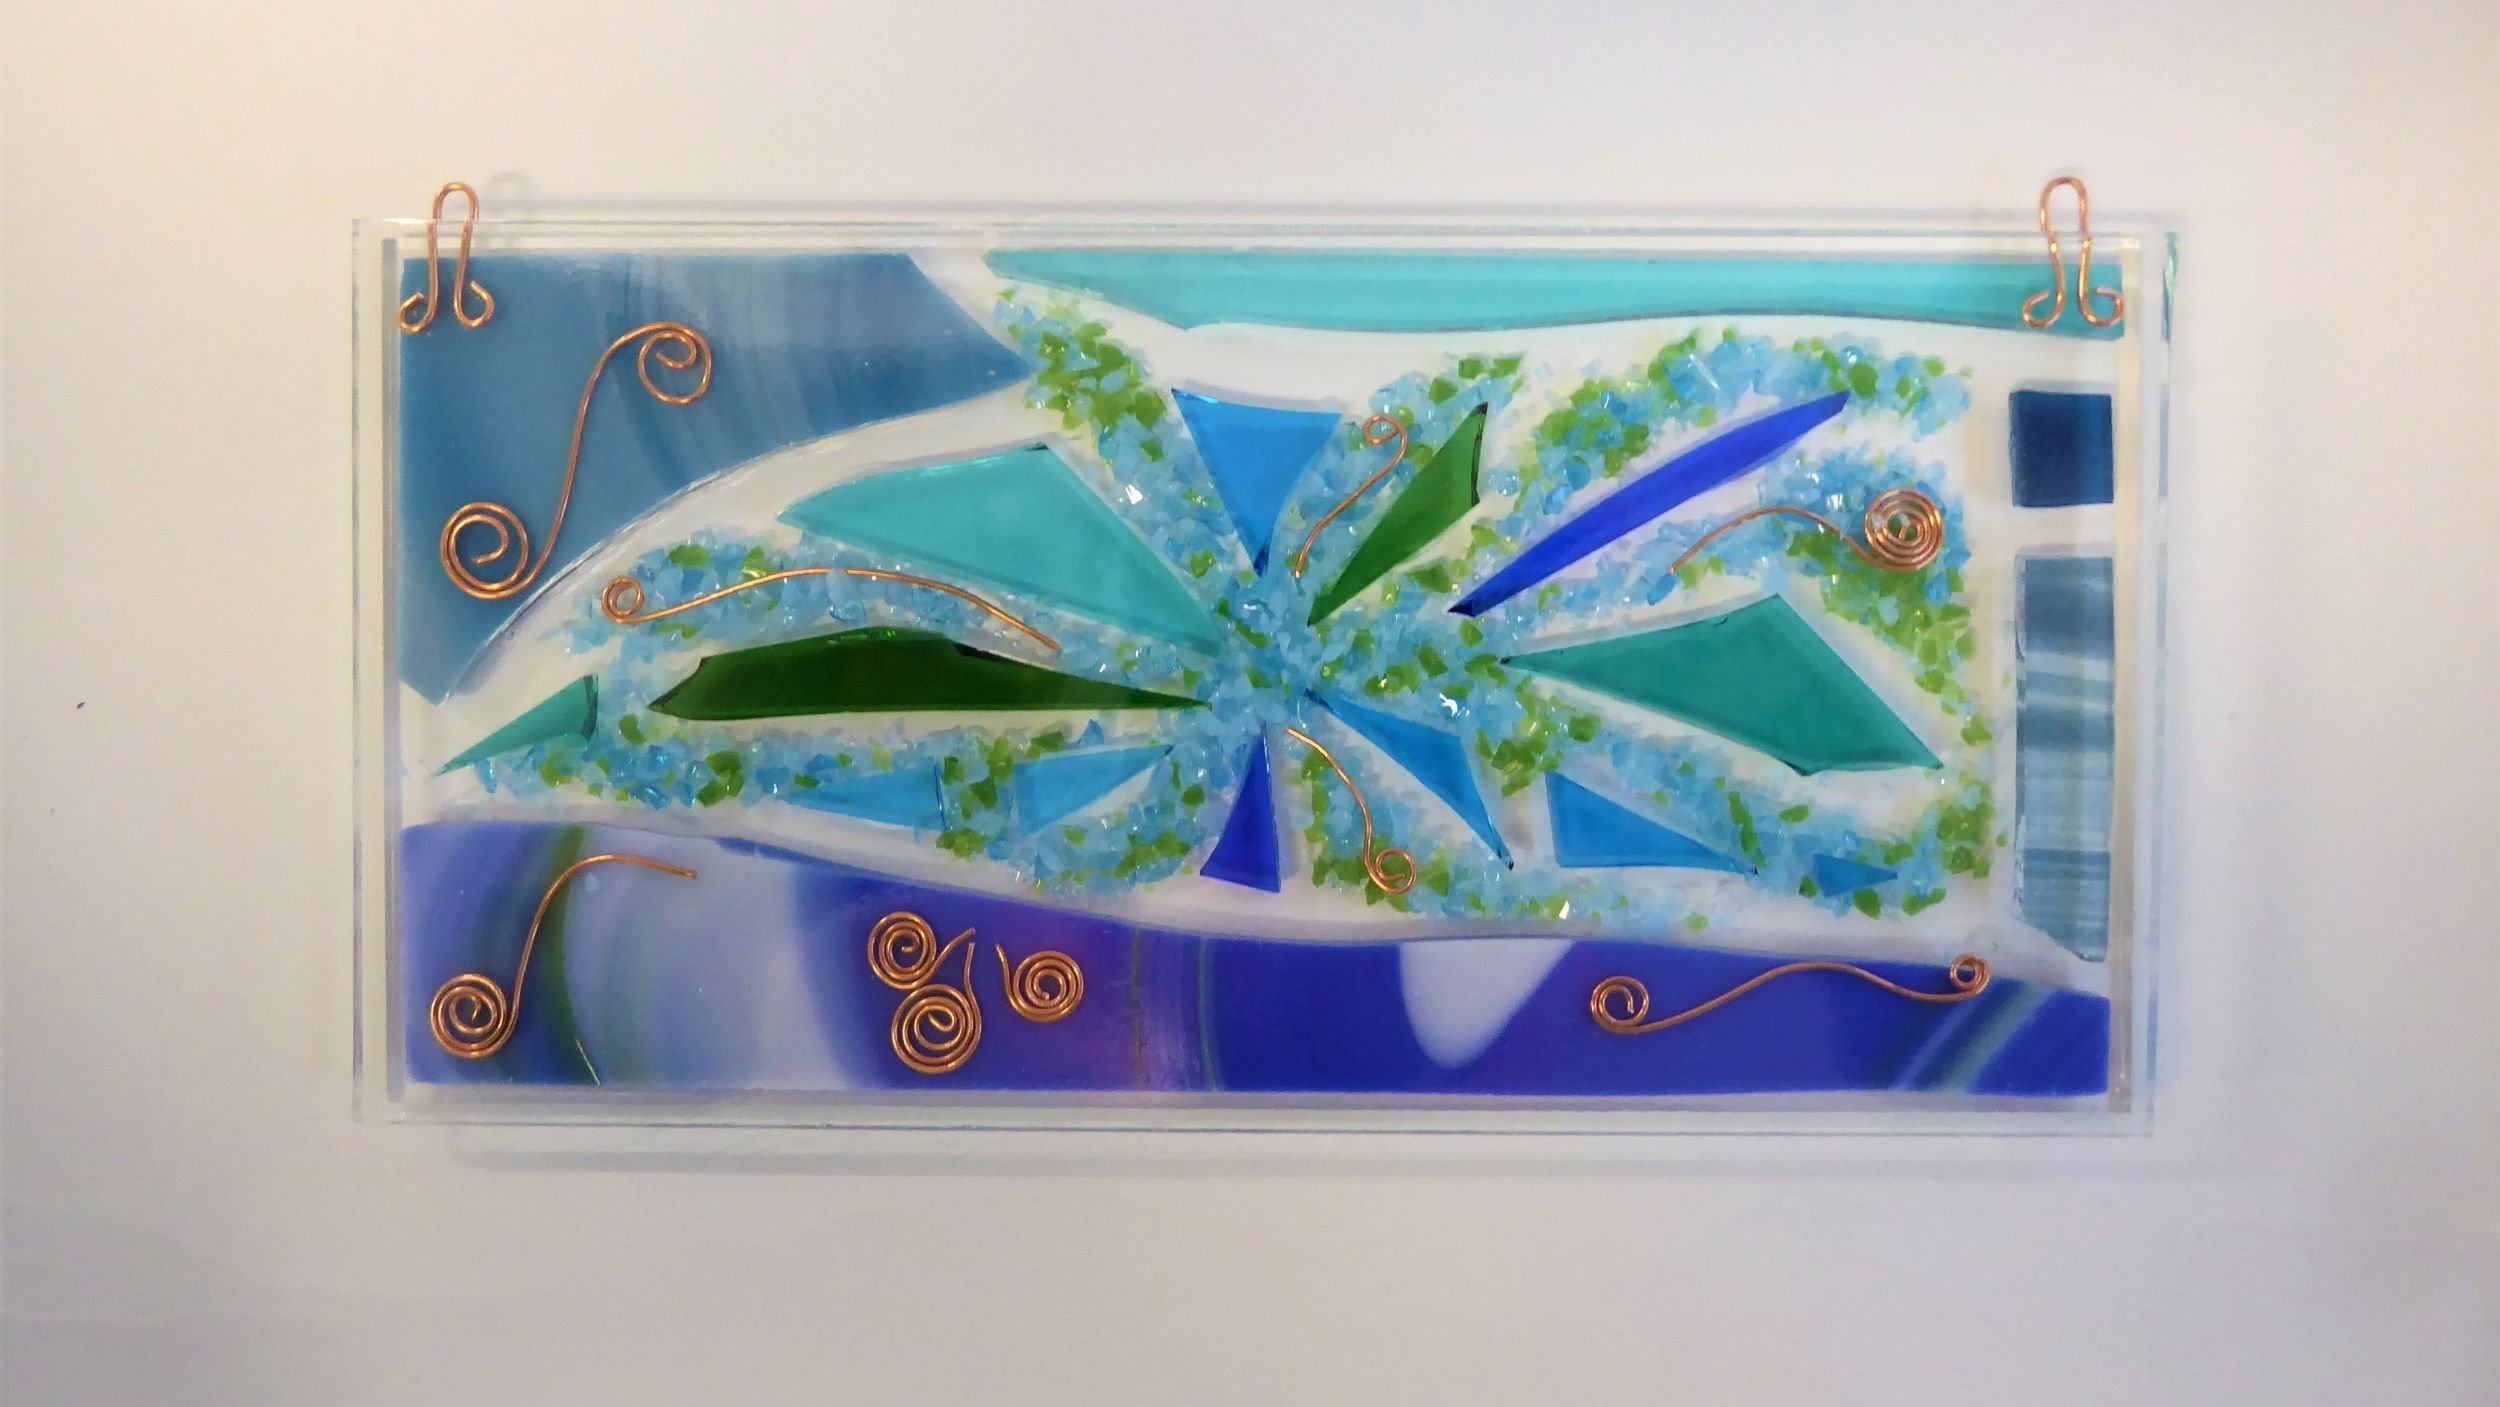 Fused glass wall panel in shades of blue and green created by Eva Glass Design.